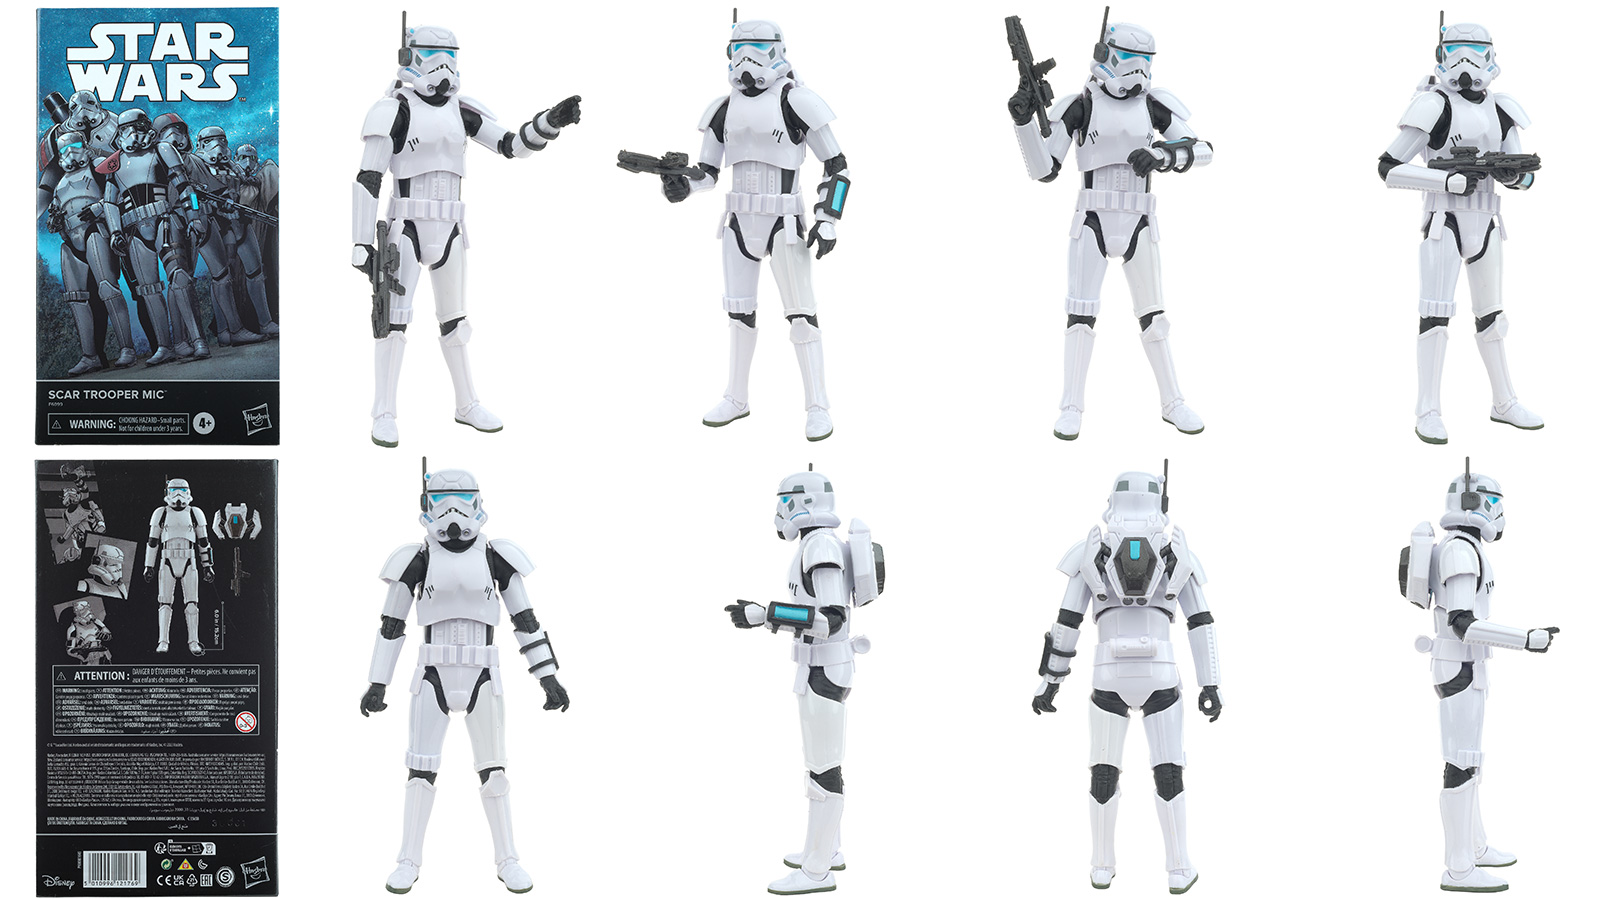 New Photos - Exclusive The Black Series 6-Inch SCAR Trooper Mic Comic Set